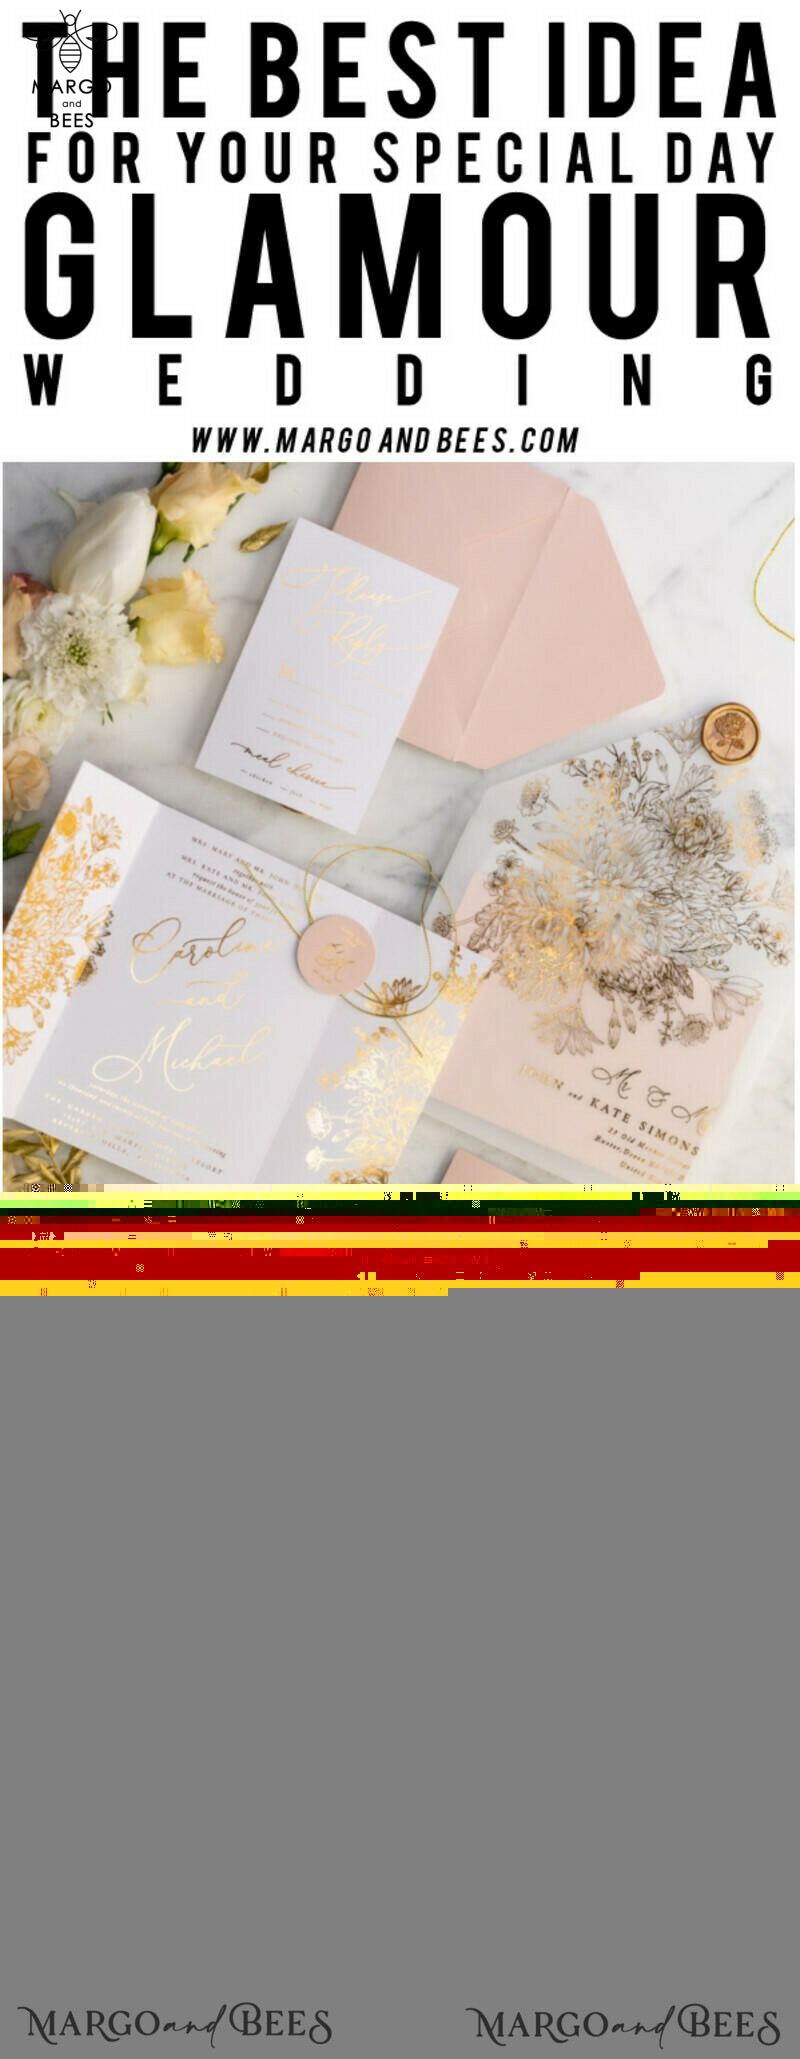 Exquisite Luxury Arabic Golden Wedding Invitations with Glamour Gold Foil and Romantic Blush Pink Design: Discover our Bespoke Indian Wedding Stationery Collection-39